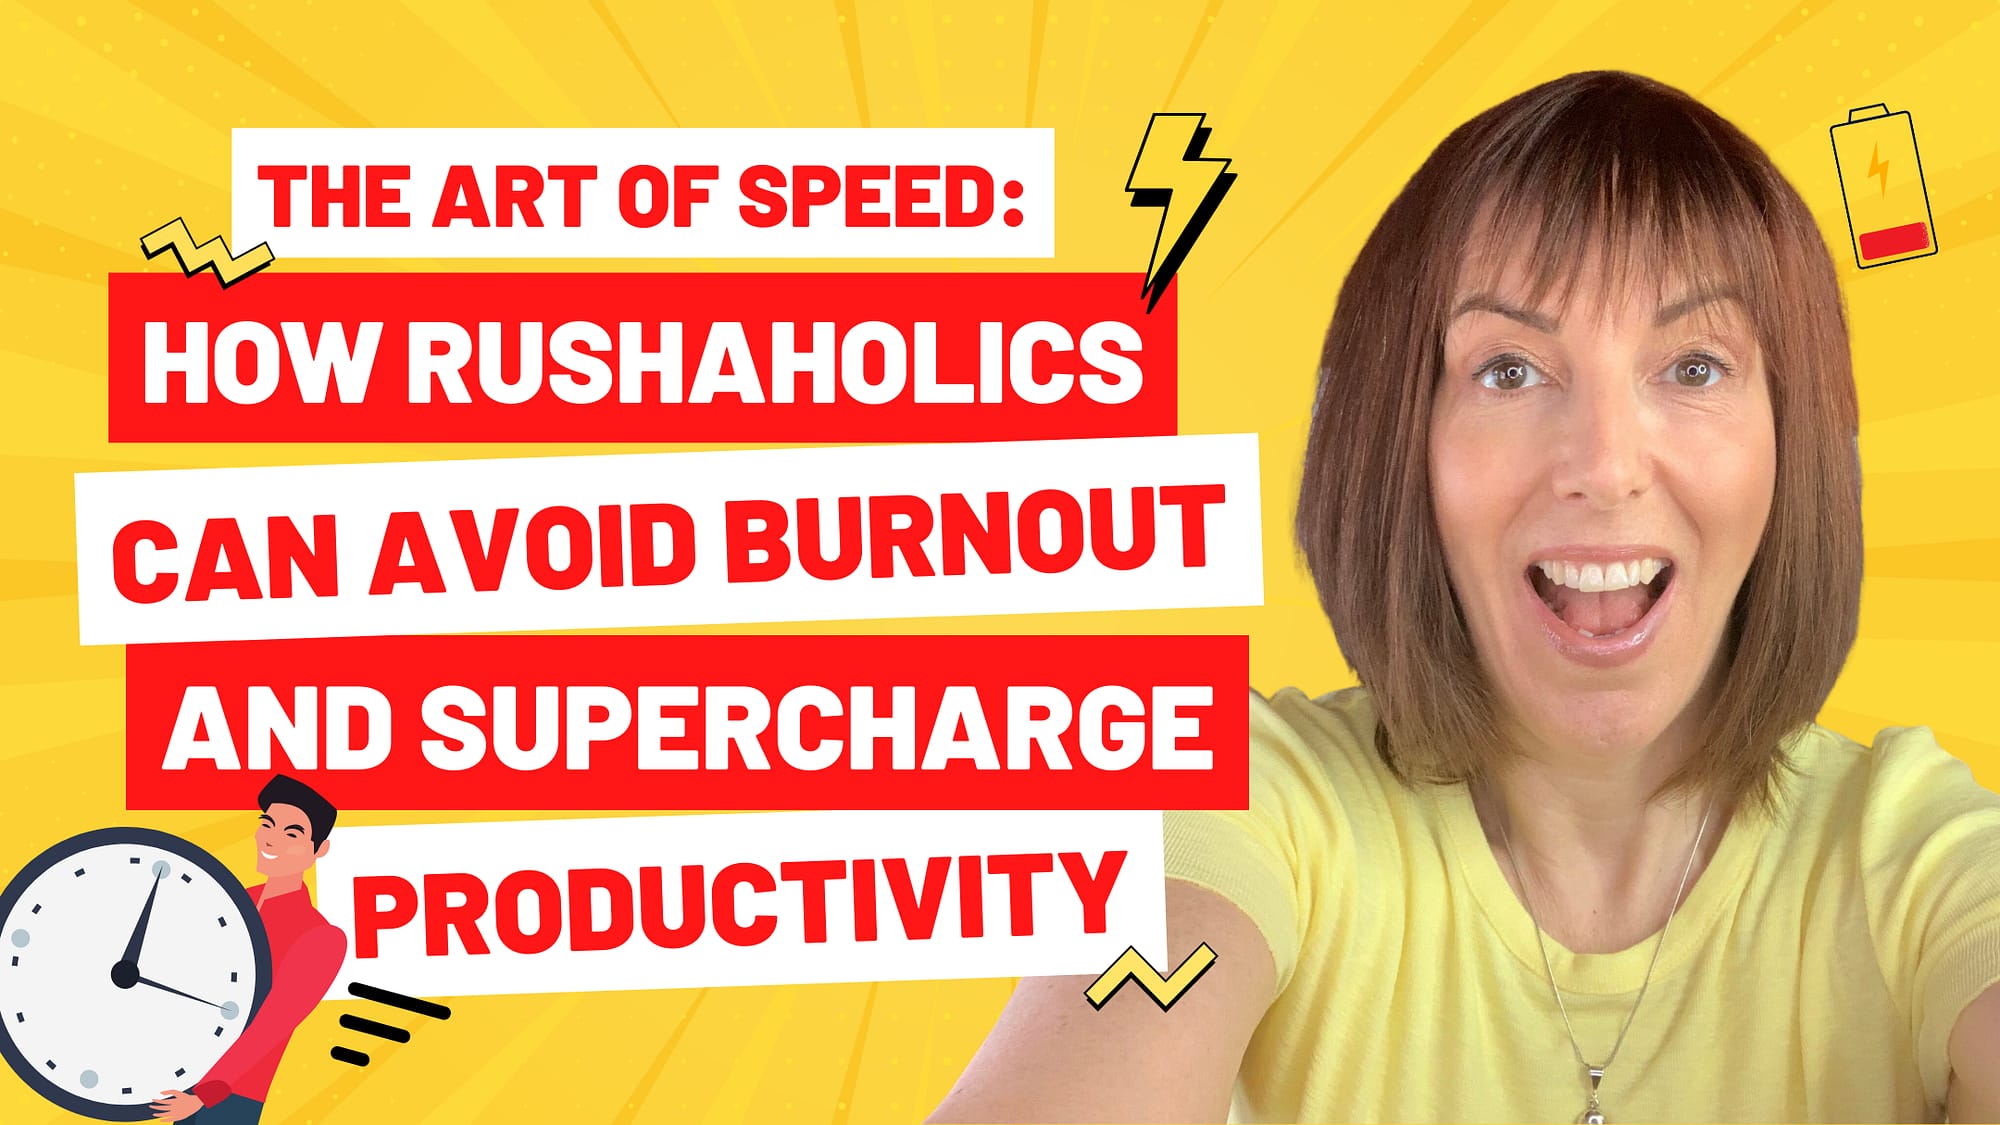 The Art of Speed: How Rushaholics Can Avoid Burnout and Supercharge Productivity